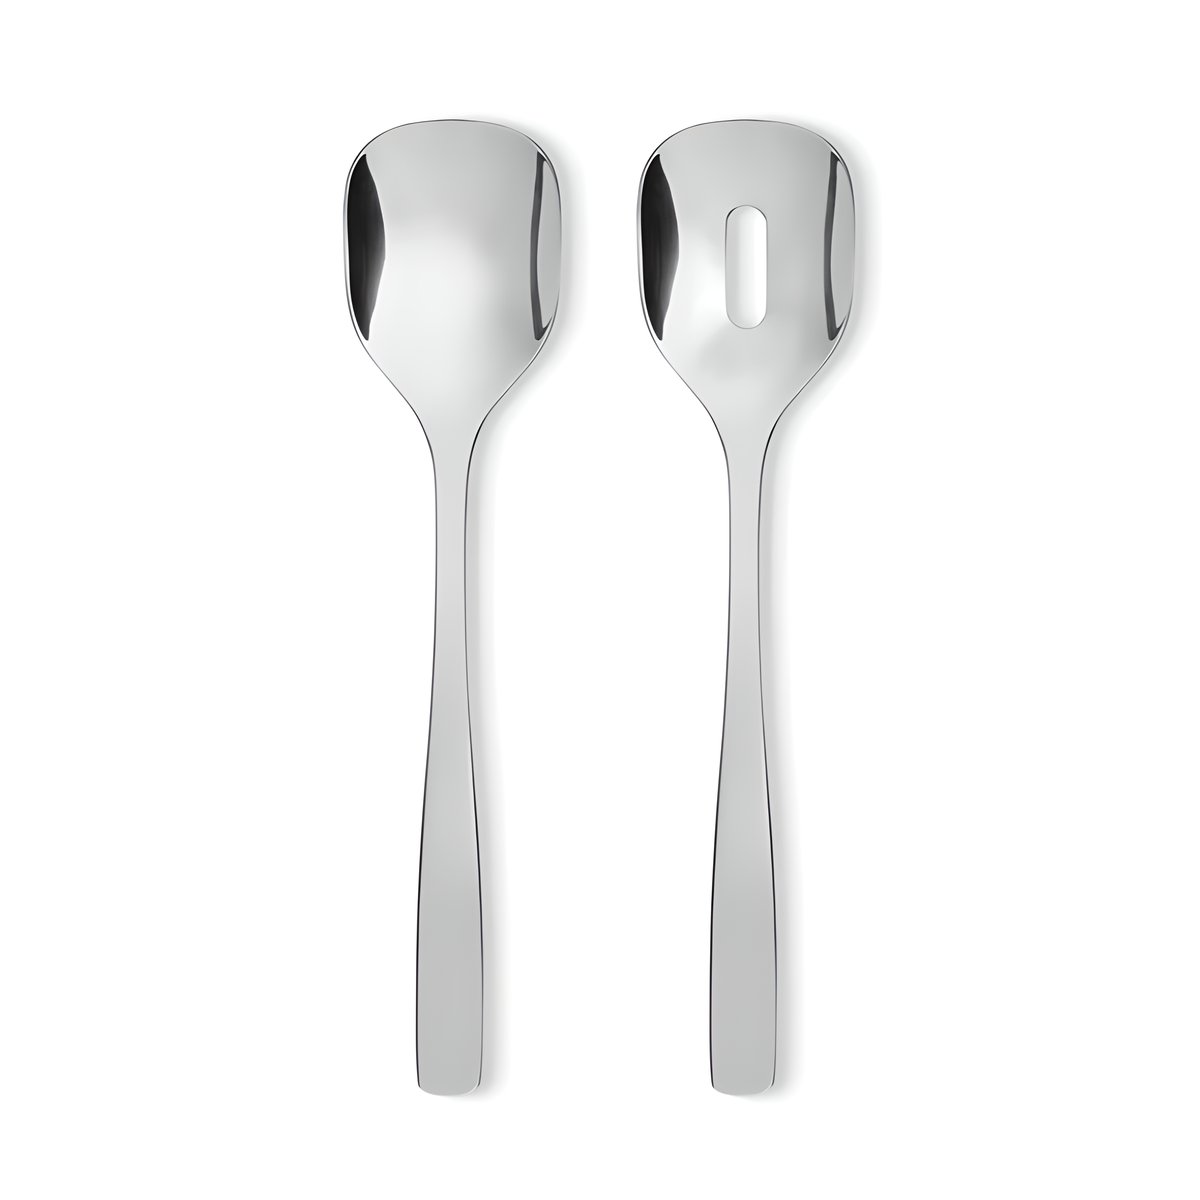 alessi couverts à salade knifeforkspoon acier inoxydable